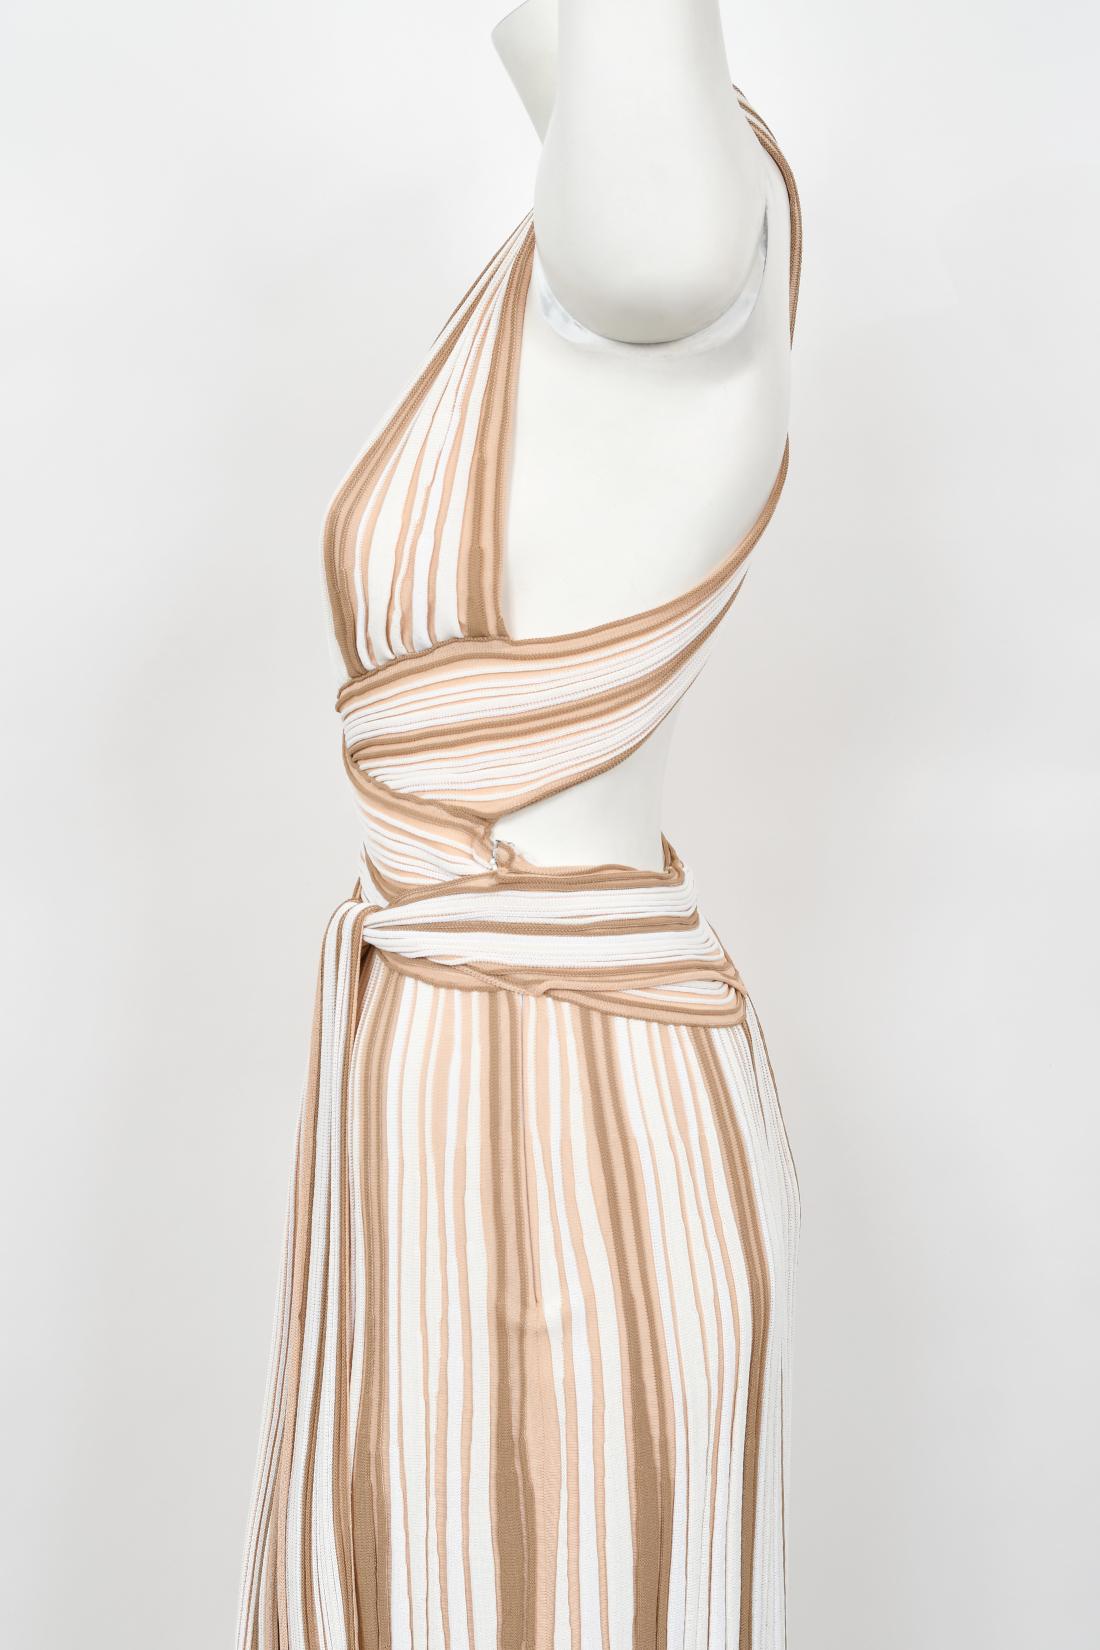 2002 Christian Dior by John Galliano Striped Stretch Knit Low-Plunge Maxi Dress For Sale 7